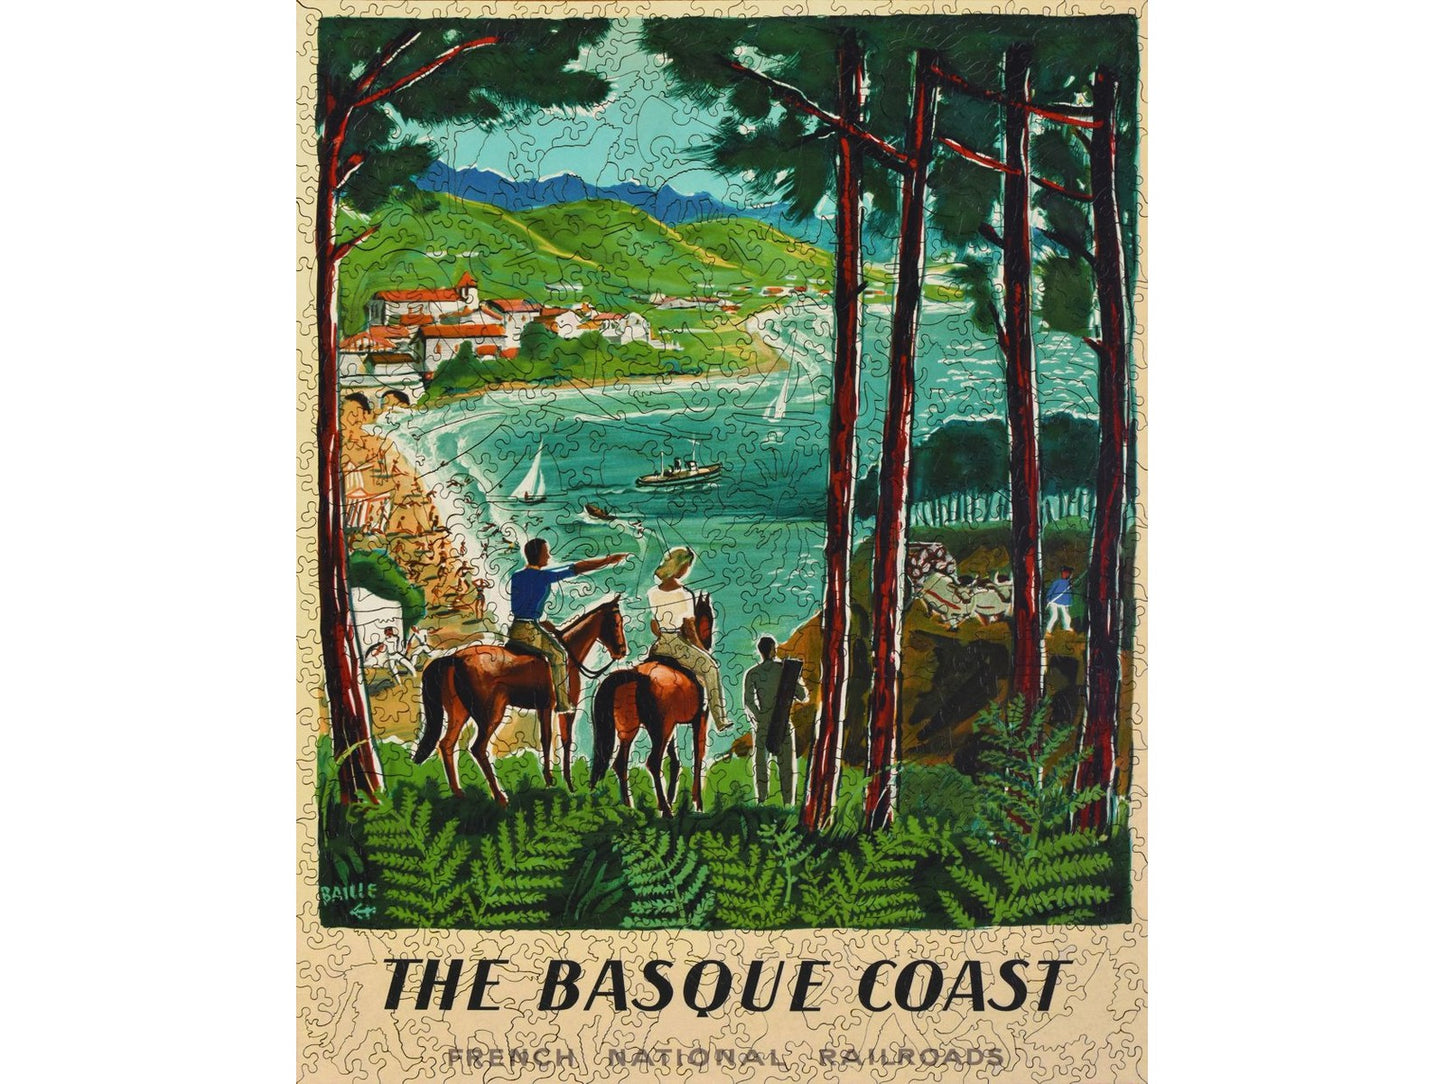 The front of the puzzle, The Basque Coast, showing people on horseback looking at the coast.